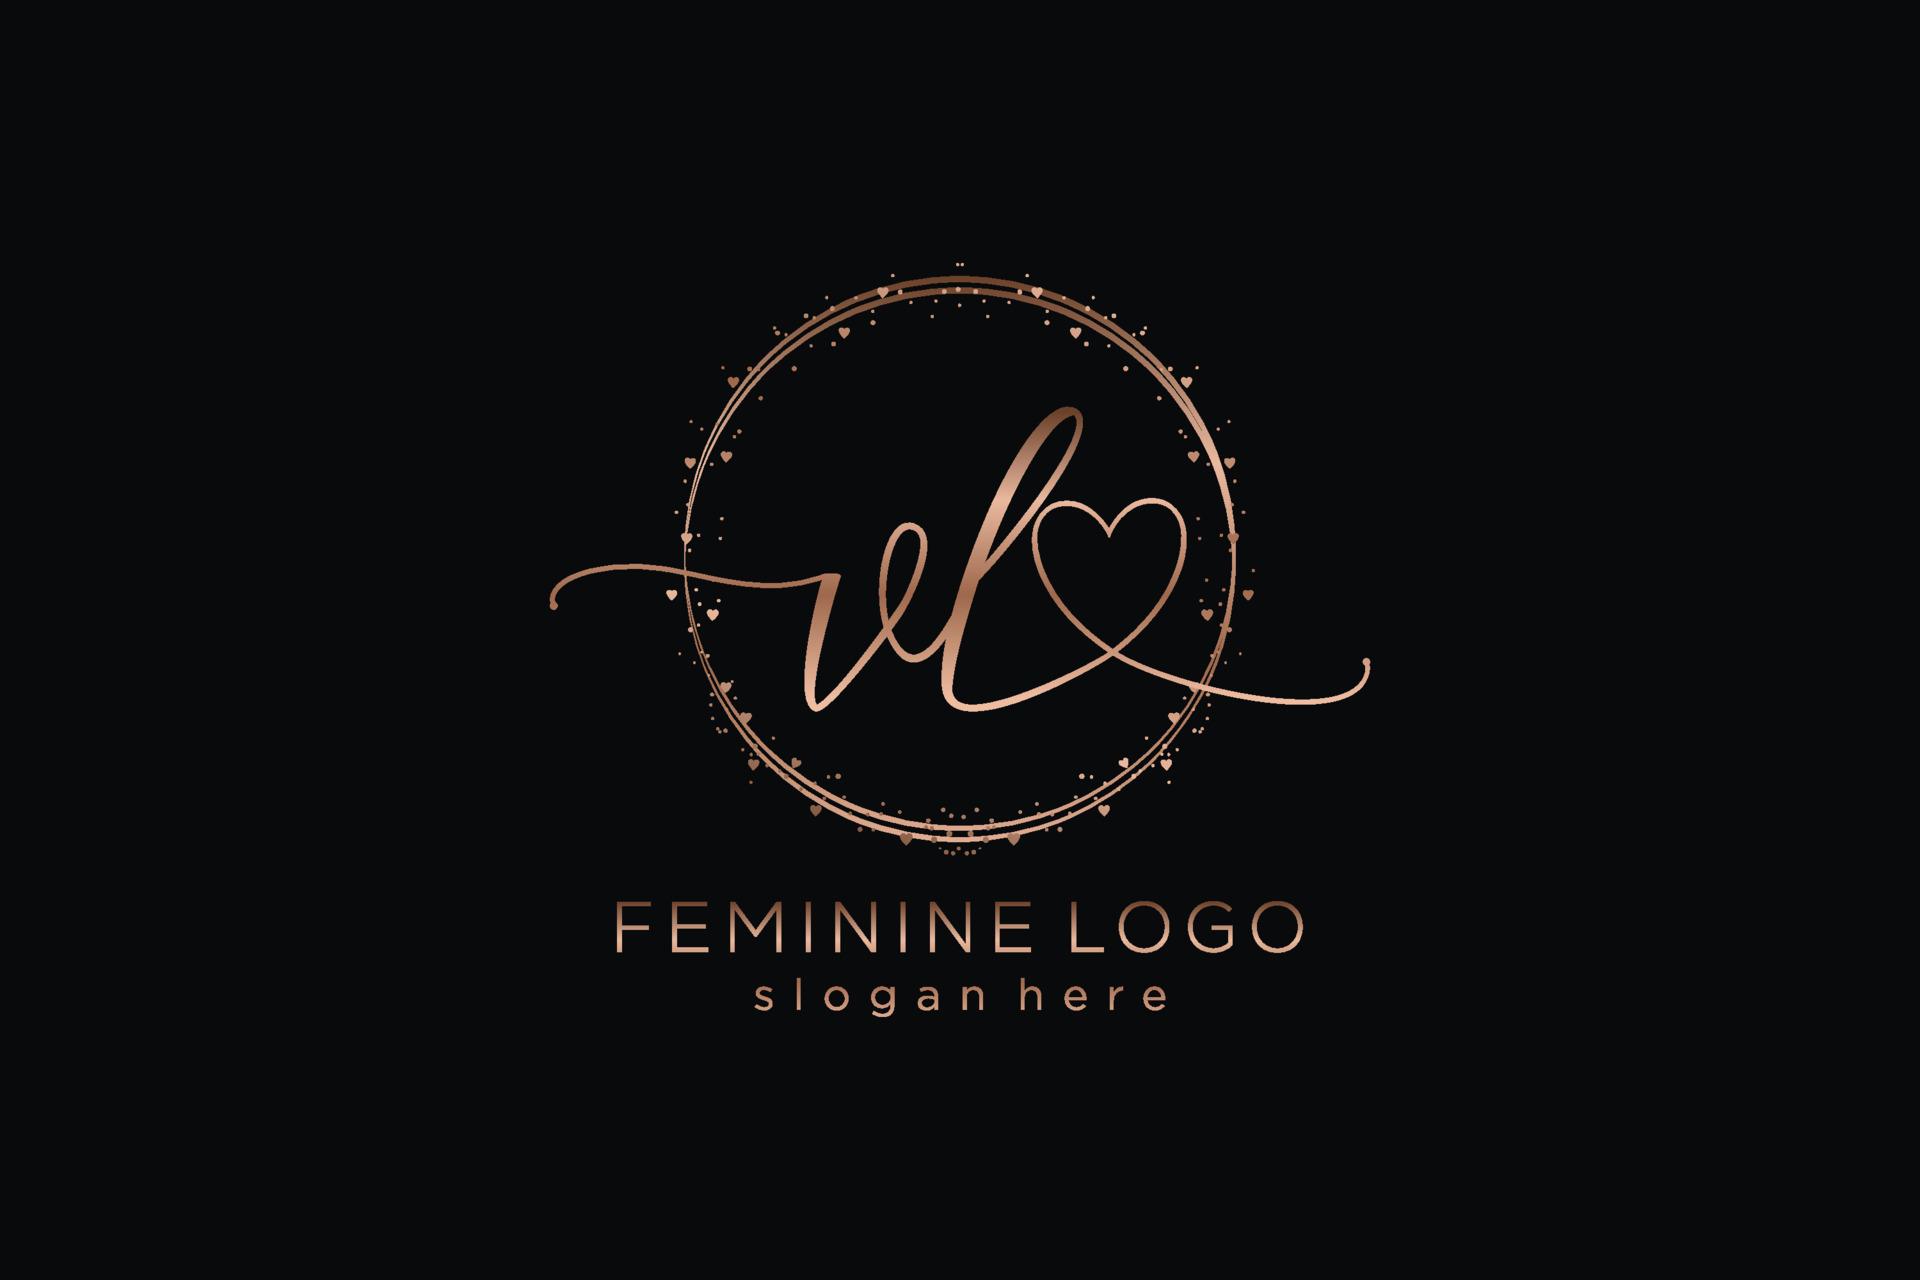 Initial VL handwriting logo with circle template vector logo of